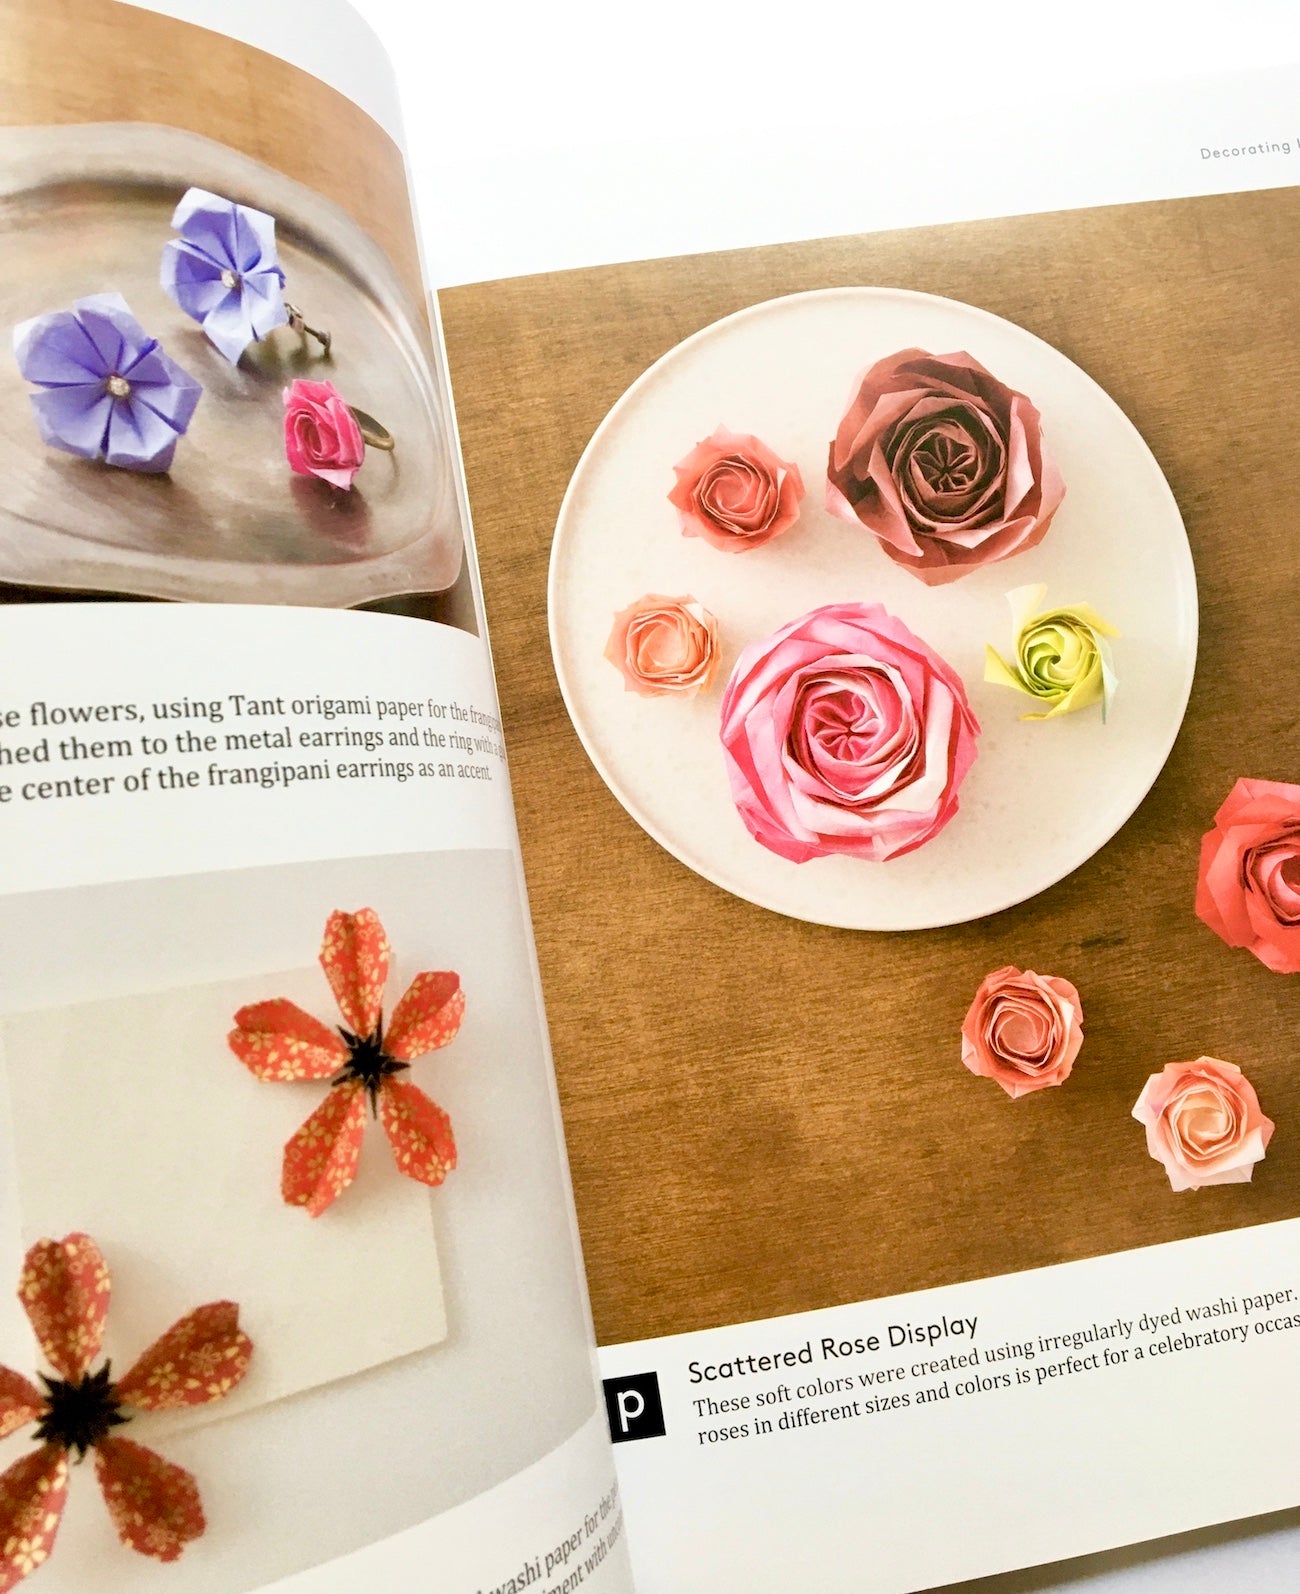 Naomiki Sato's Origami Roses: Create Lifelike Roses and Other Blossoms